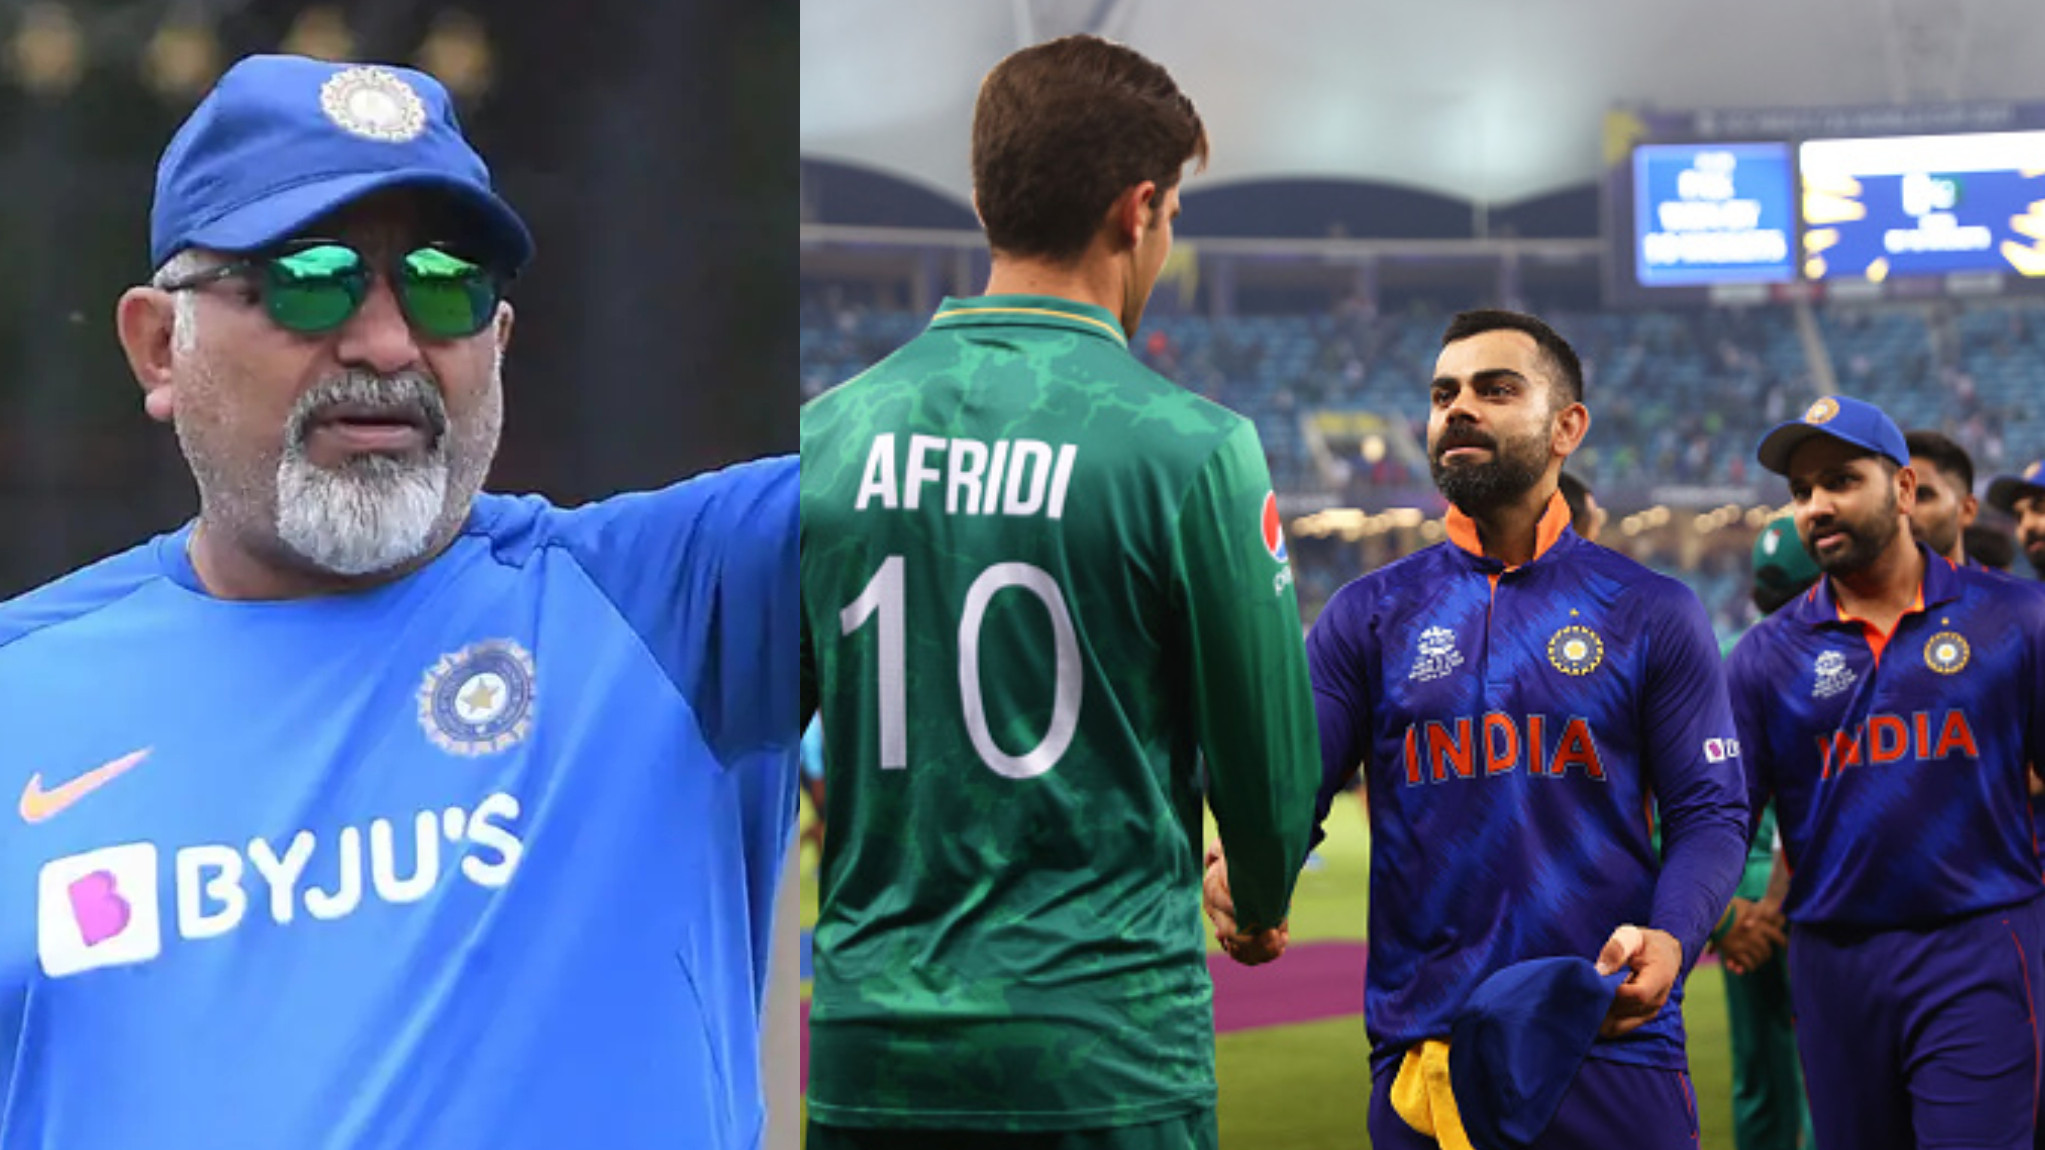 T20 World Cup 2021: We were below-par against Pakistan, there's no excuses - India bowling coach B Arun